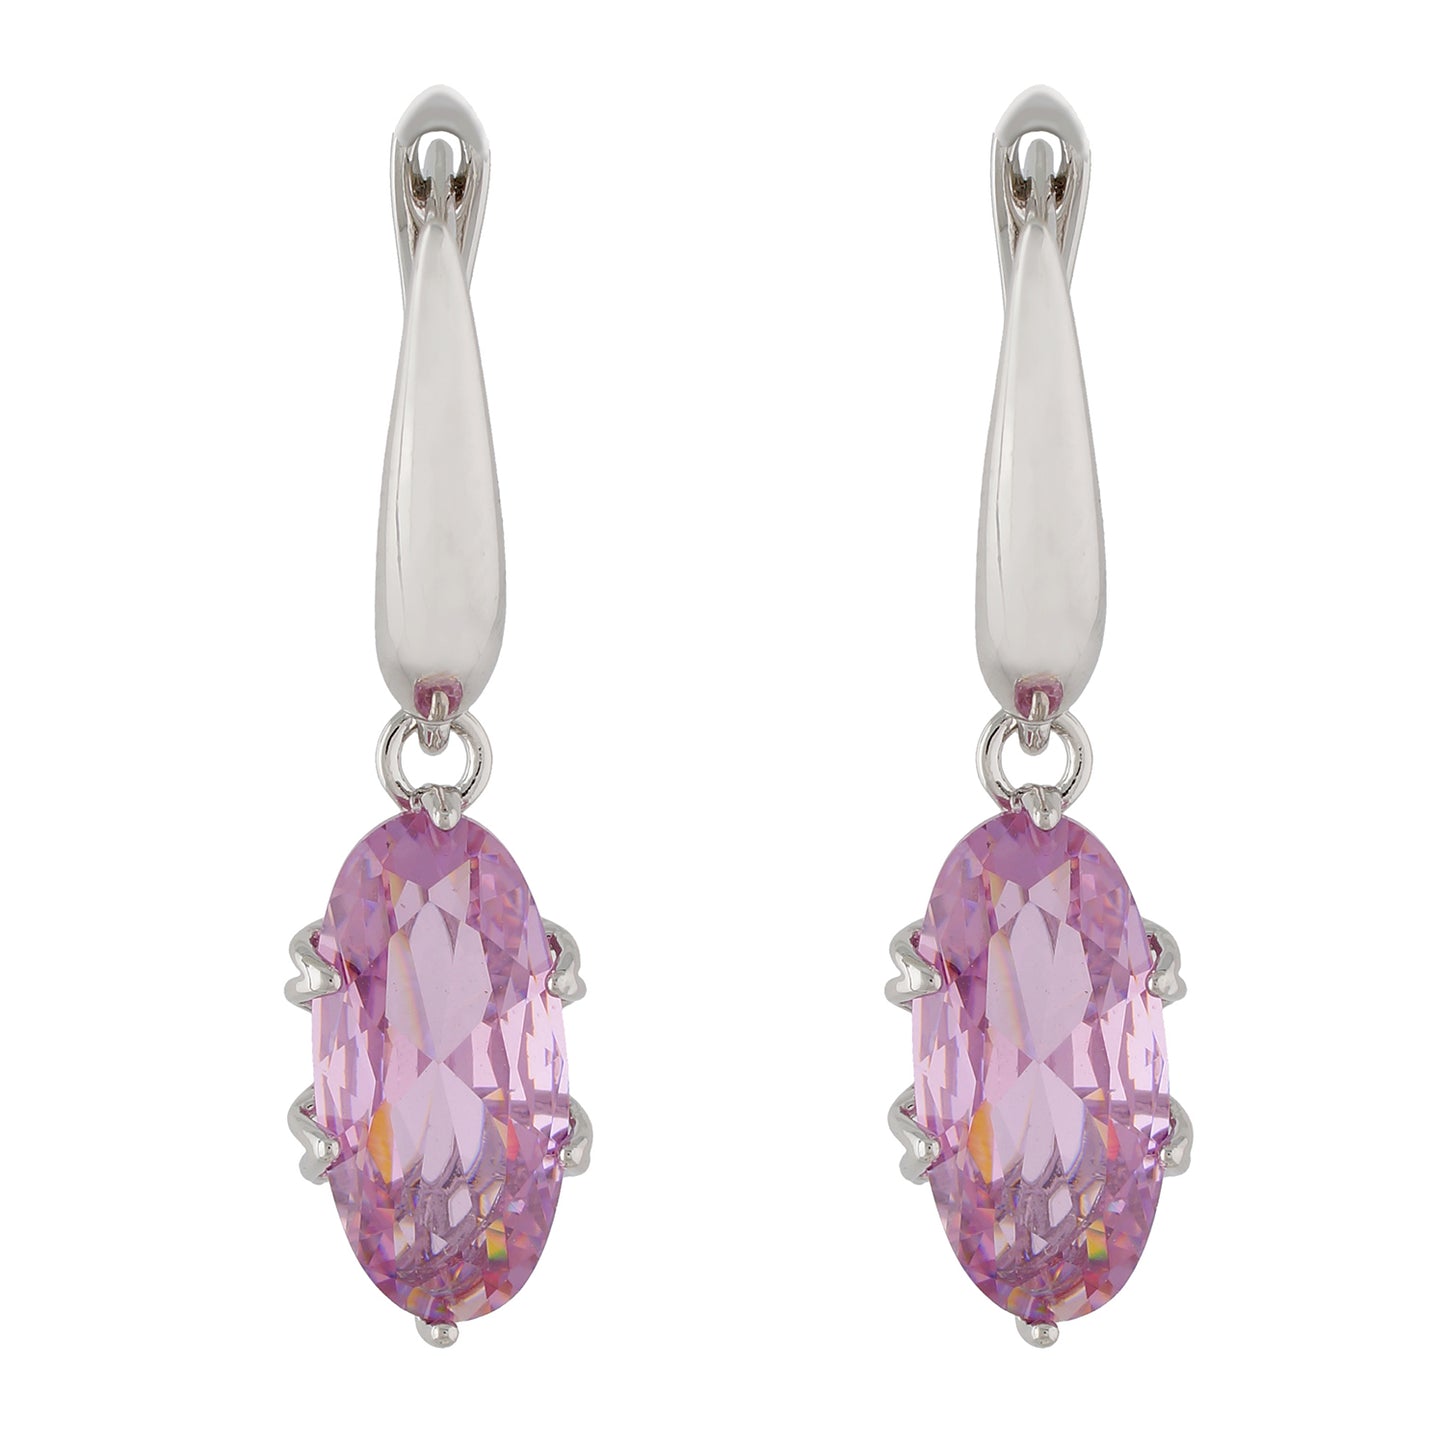 Impressive Pink and Silver Colour Oval Shape Earring for Girls and Women